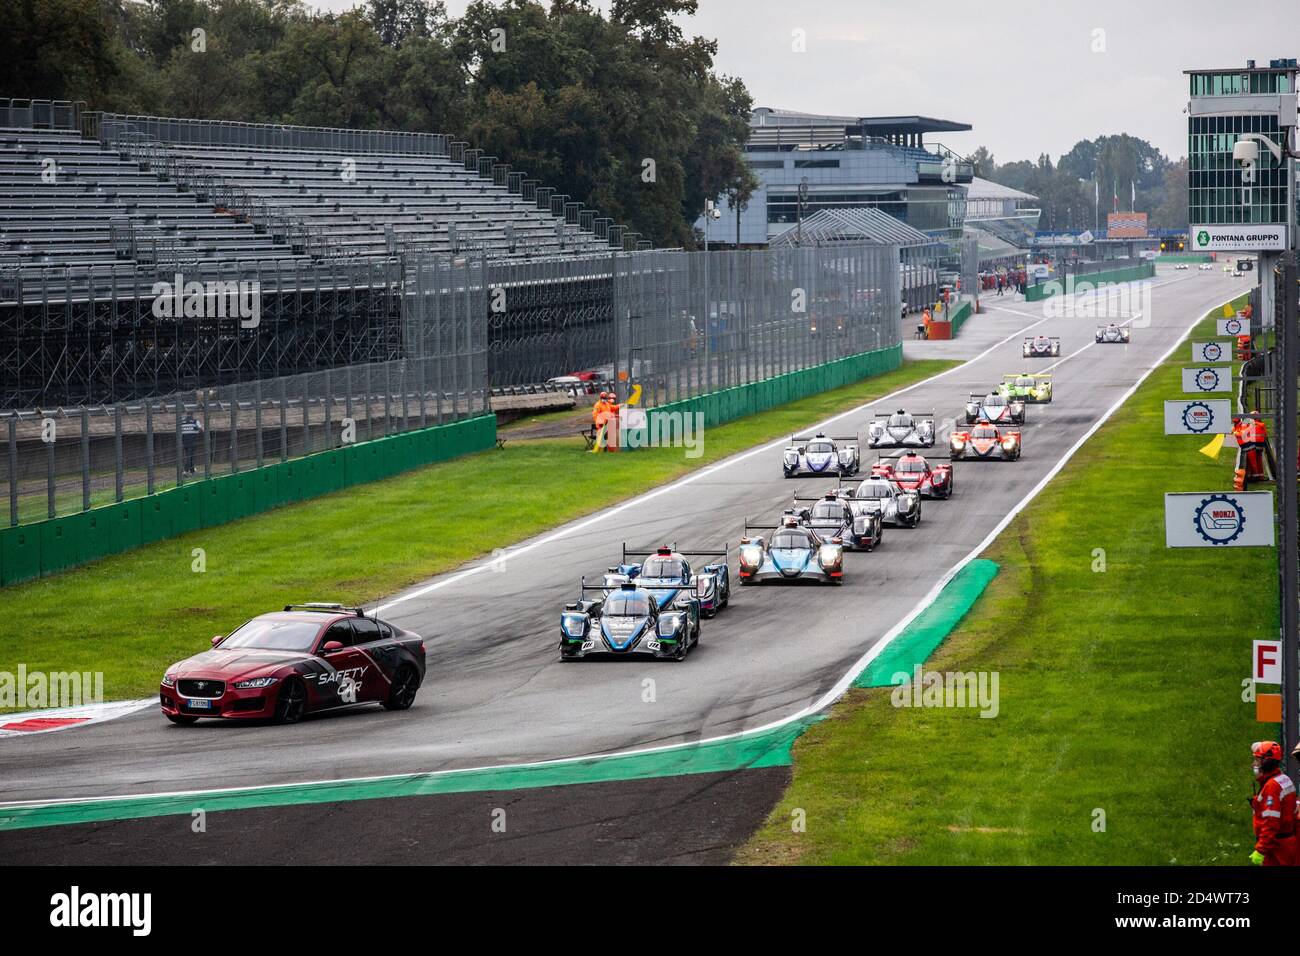 Monza, Italy. 11th October, 2020. start of the race, depart, safety car, during the 2020 4 Hours of Monza, 4th round of the 2020 European Le Mans Series, from October 9 to 11, 2020 on the Autodromo Nazionale di Monza, Italy - Photo Germain Hazard / DPPI Credit: LM/DPPI/Germain Hazard/Alamy Live News Stock Photo